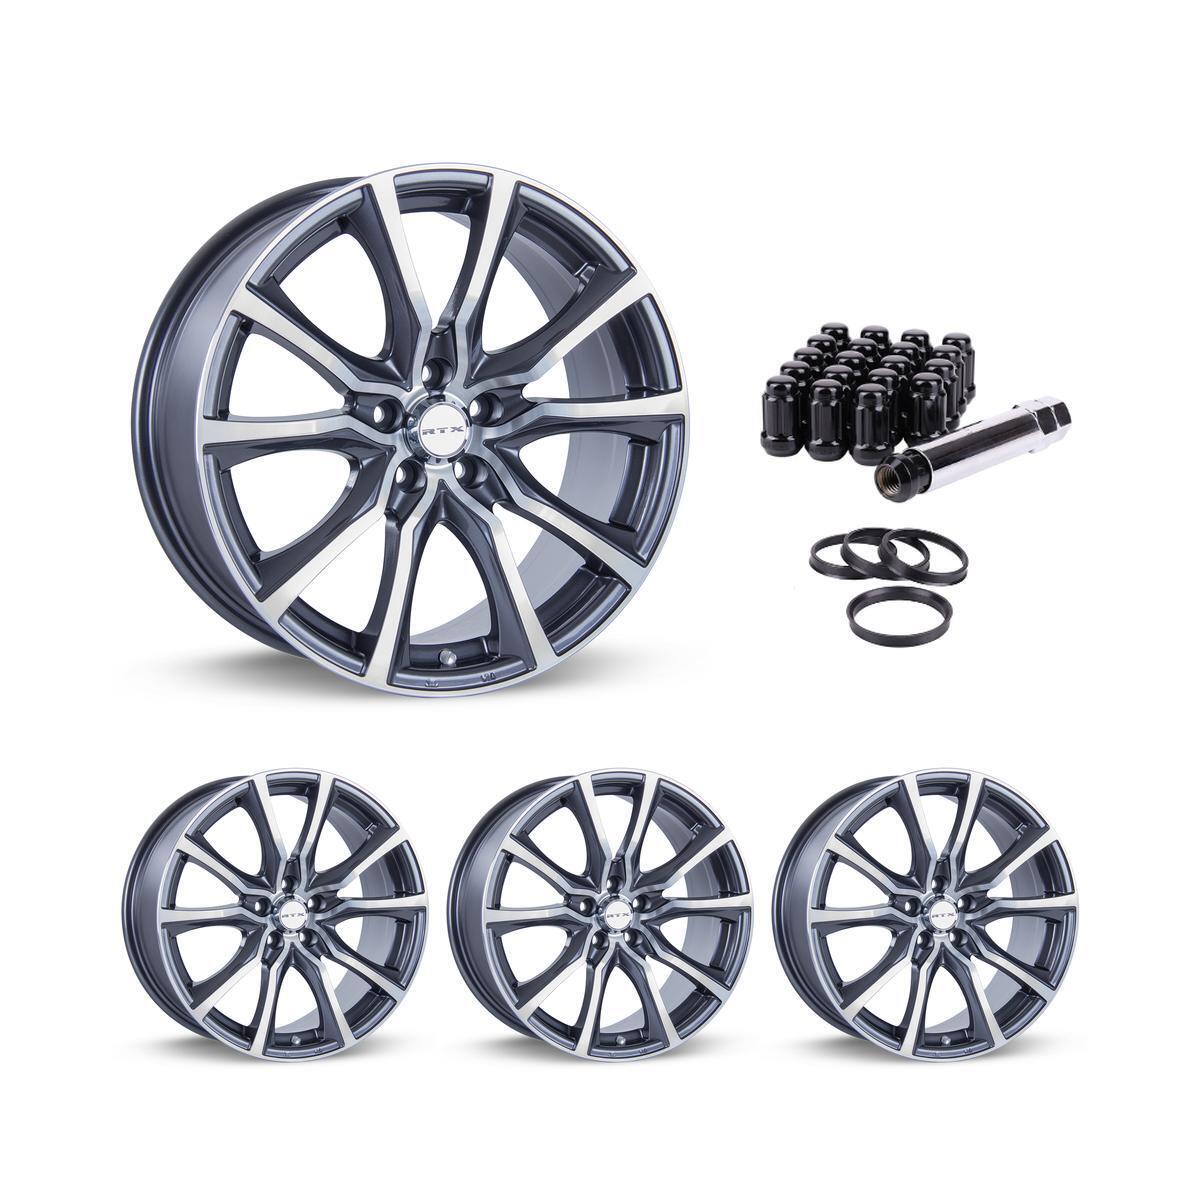 Wheel Rims Set with Black Lug Nuts Kit for 05 Buick Terraza P831640 17 inch